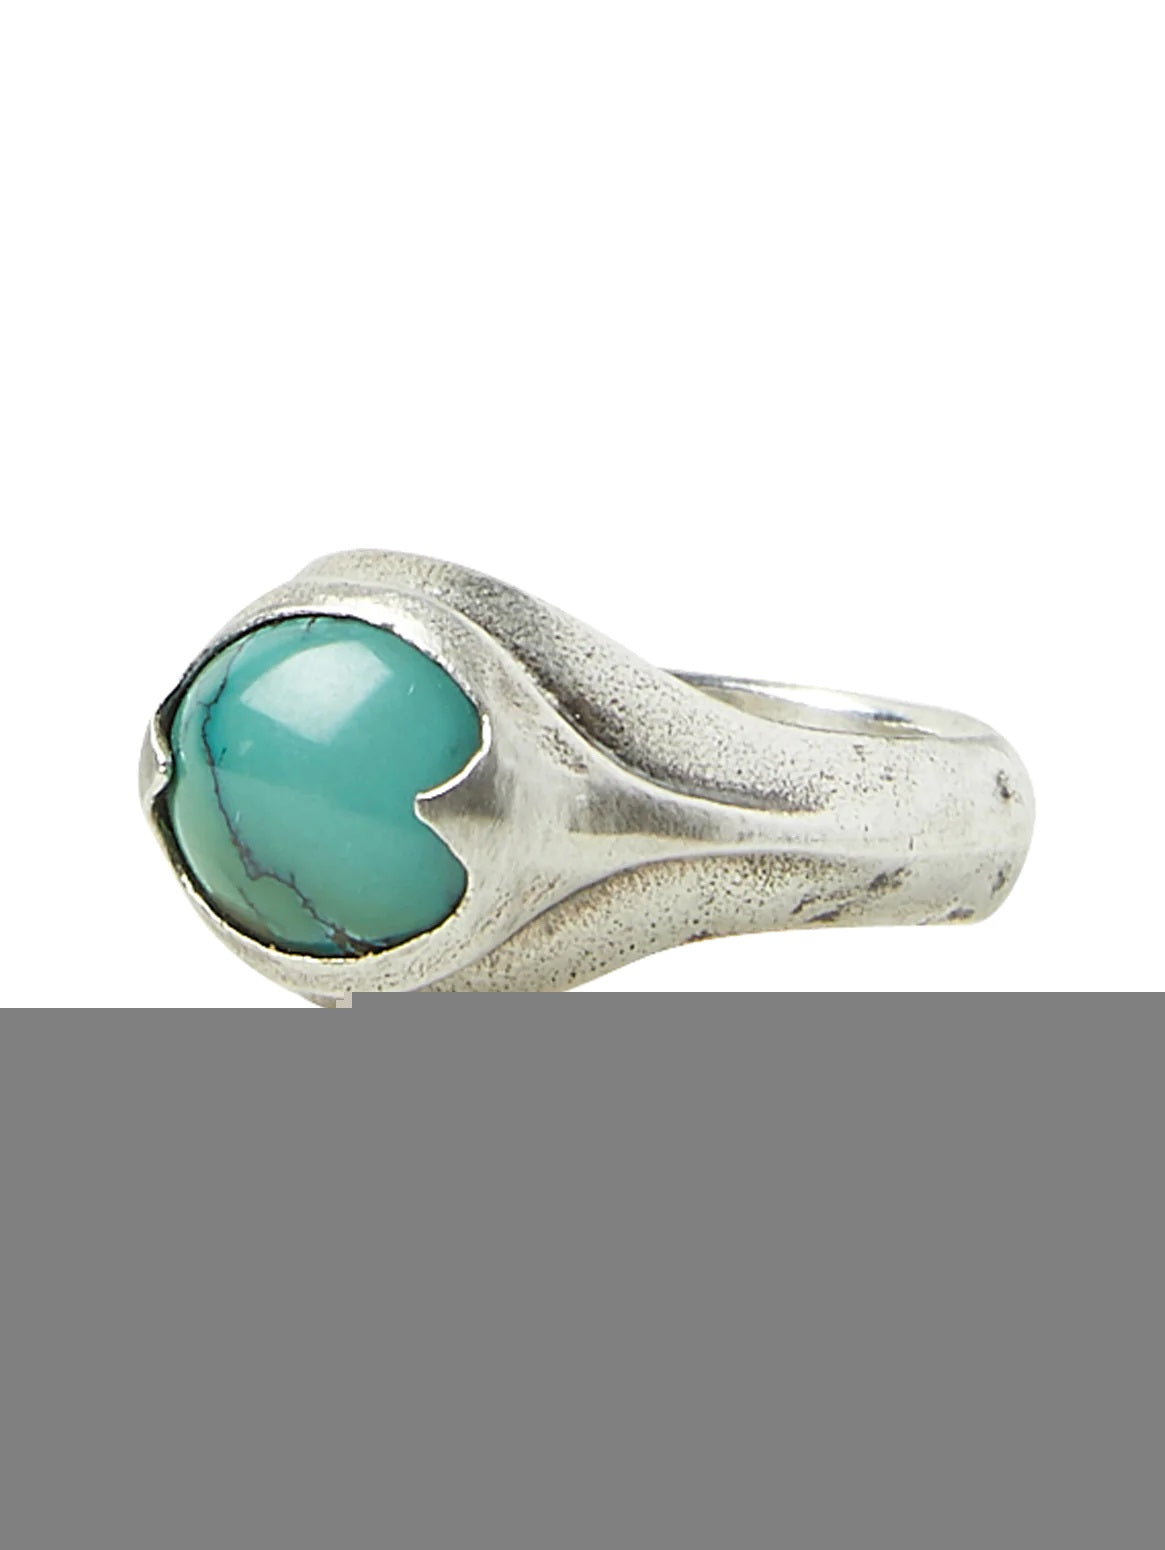 STONES STERLING SILVER STONE RING, WITH TURQUOISE